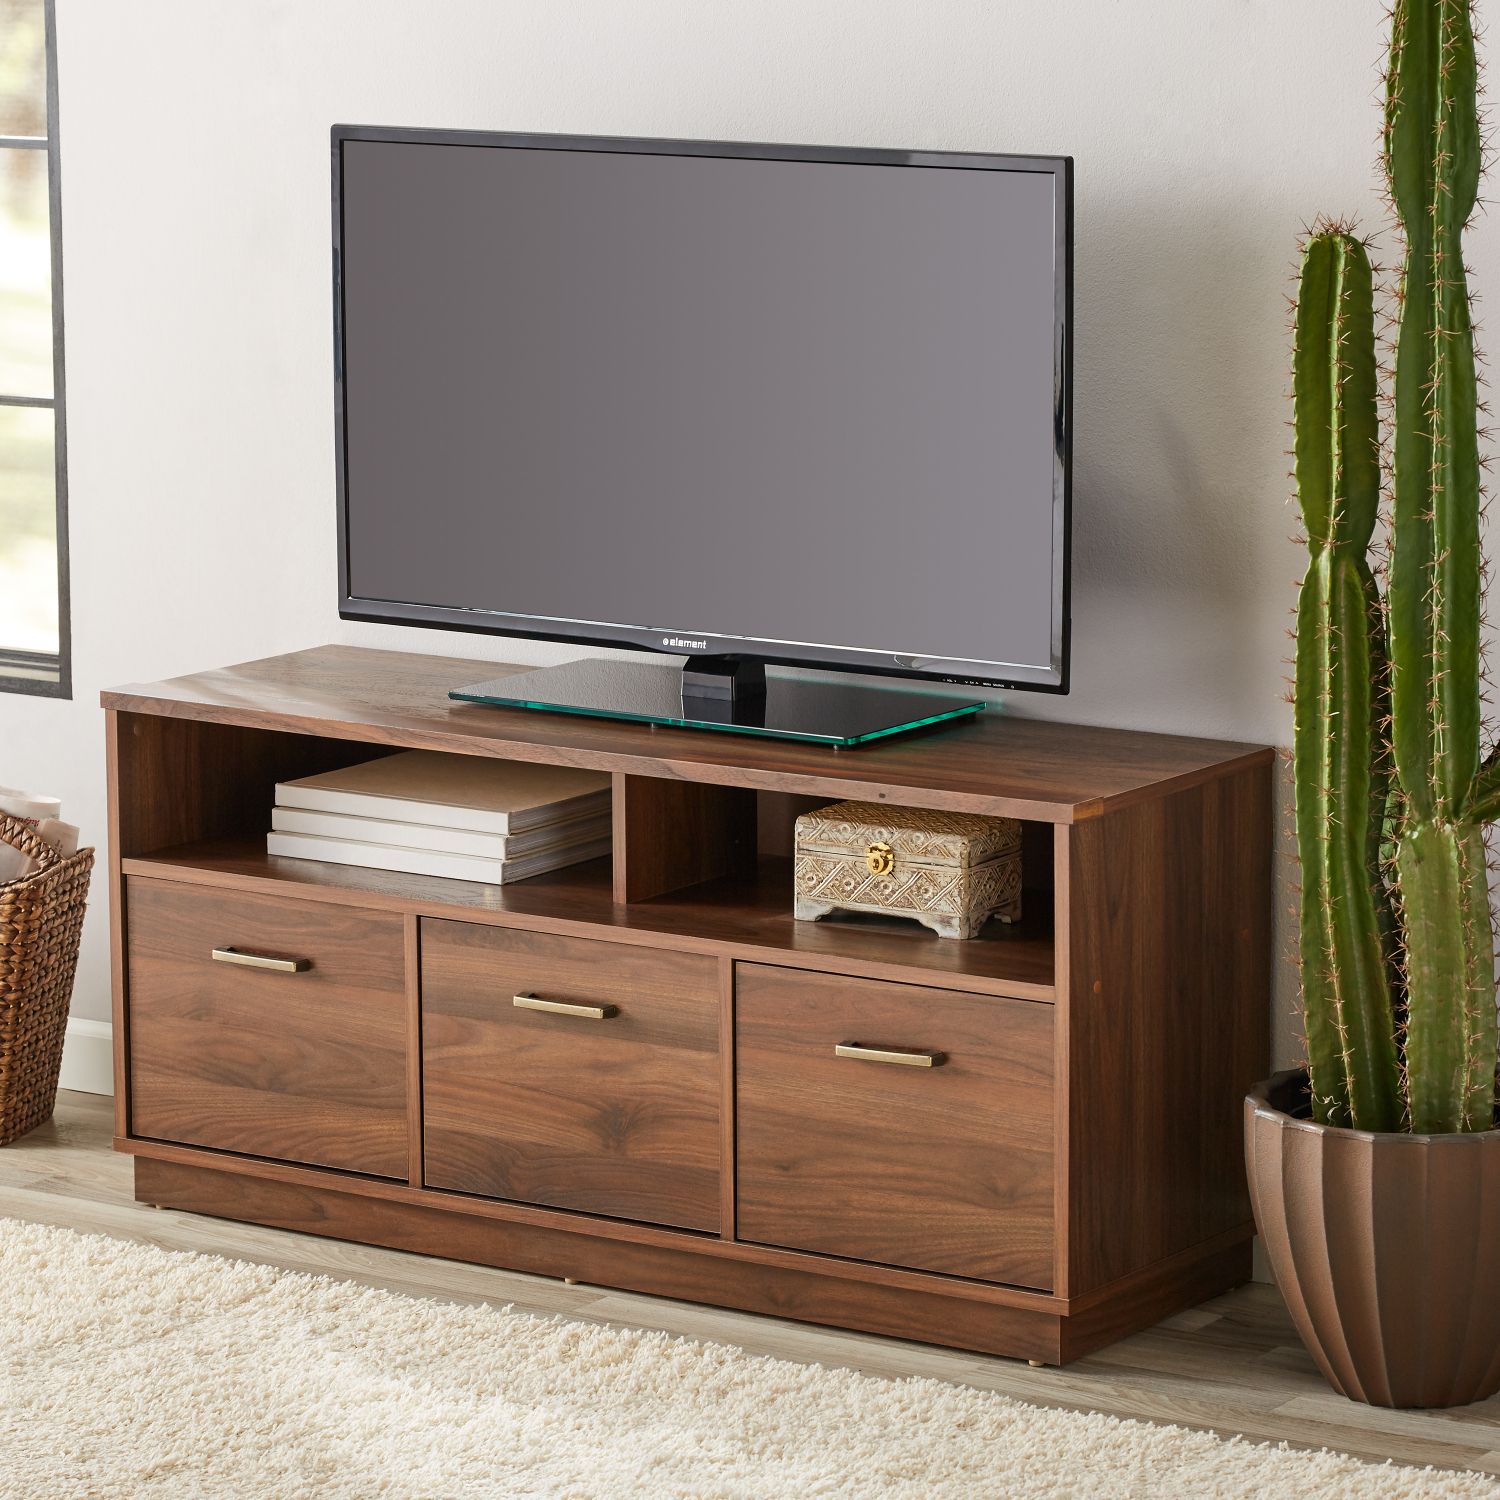 Canyon Walnut 3 Door Tv Stand Console For Tvs Up To 50 Wooden Cabinet Inside Walnut Wood Storage Trunk Console Tables (View 19 of 20)